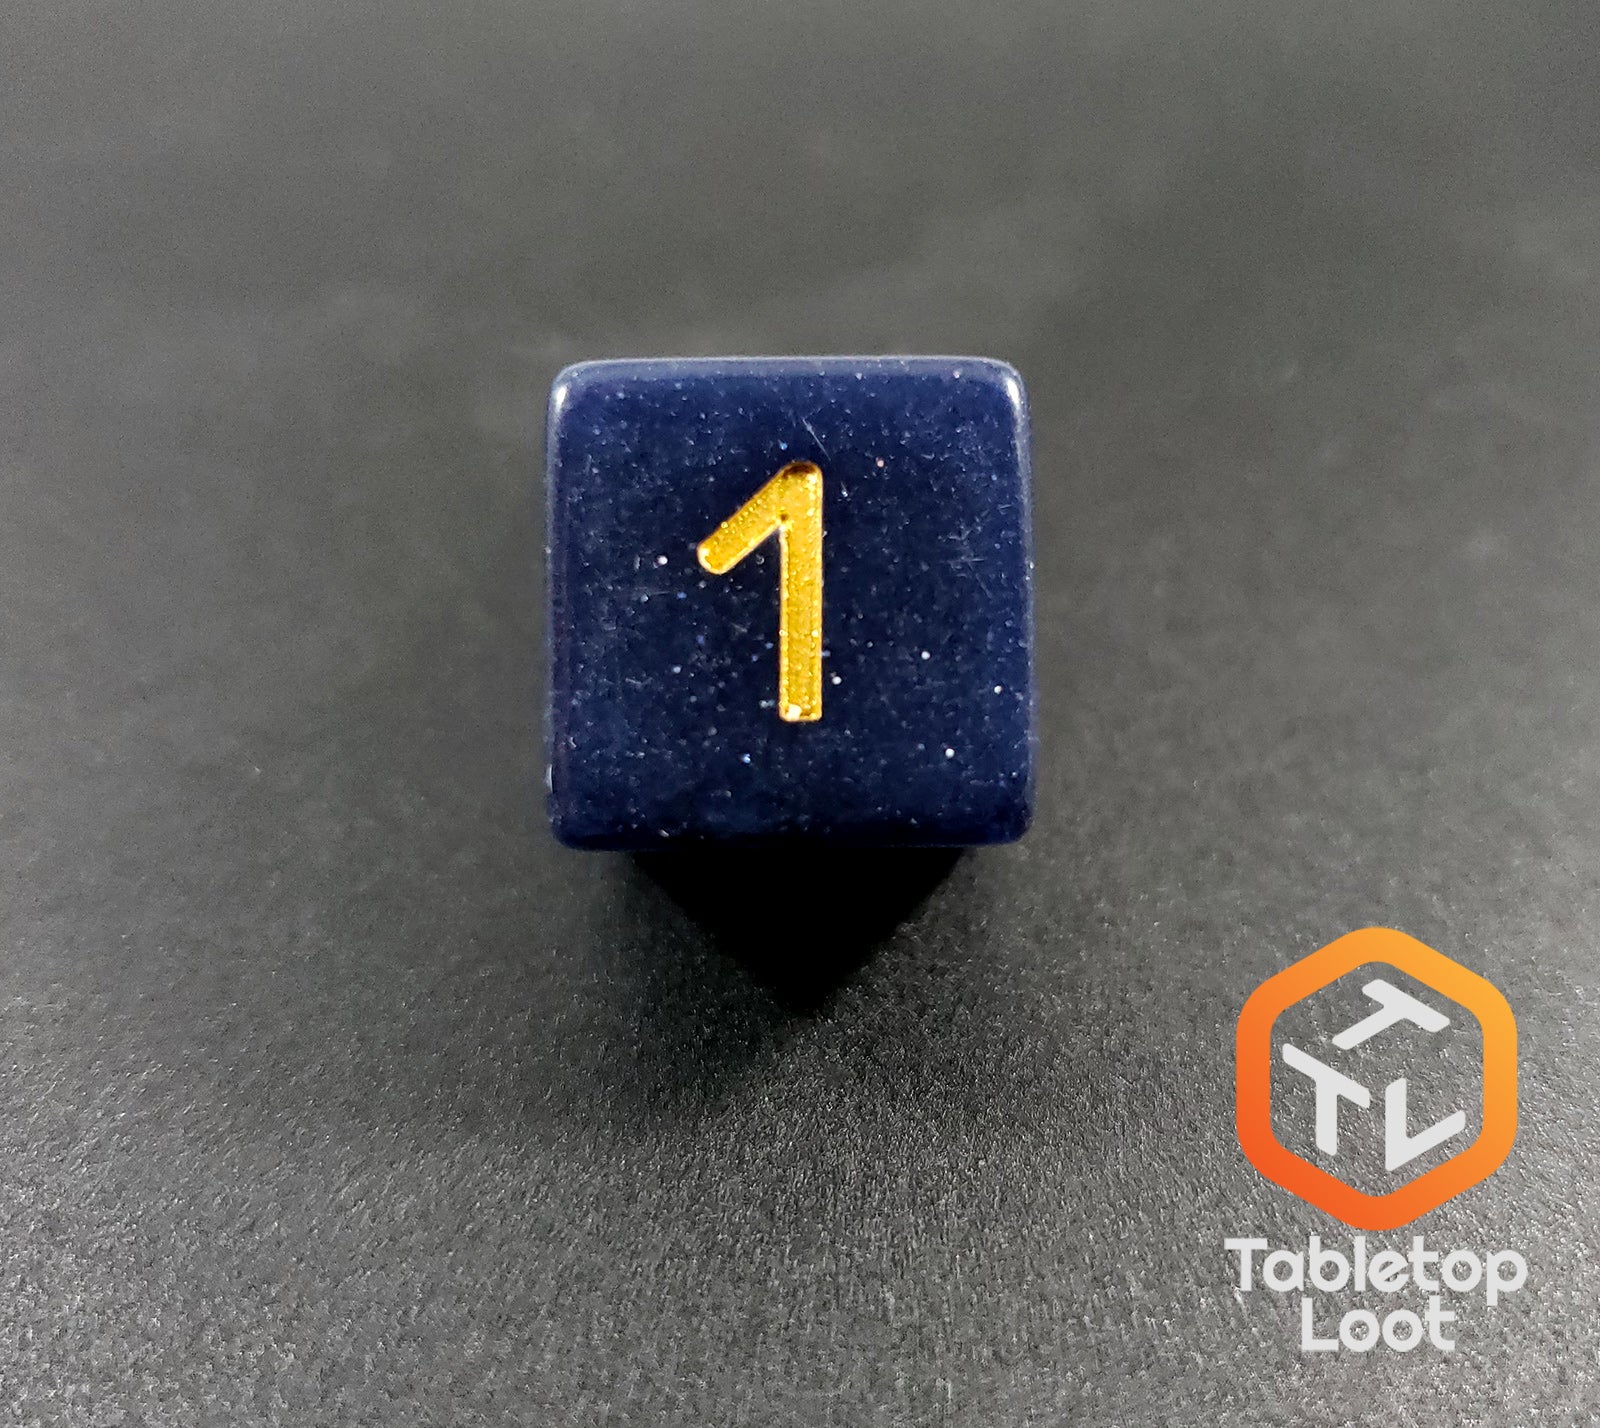 A close up of the D6 from the Starry Twilight 7 piece dice set from Tabletop Loot, with an opaque deep navy resin filled with gold glitter and inked in gold.